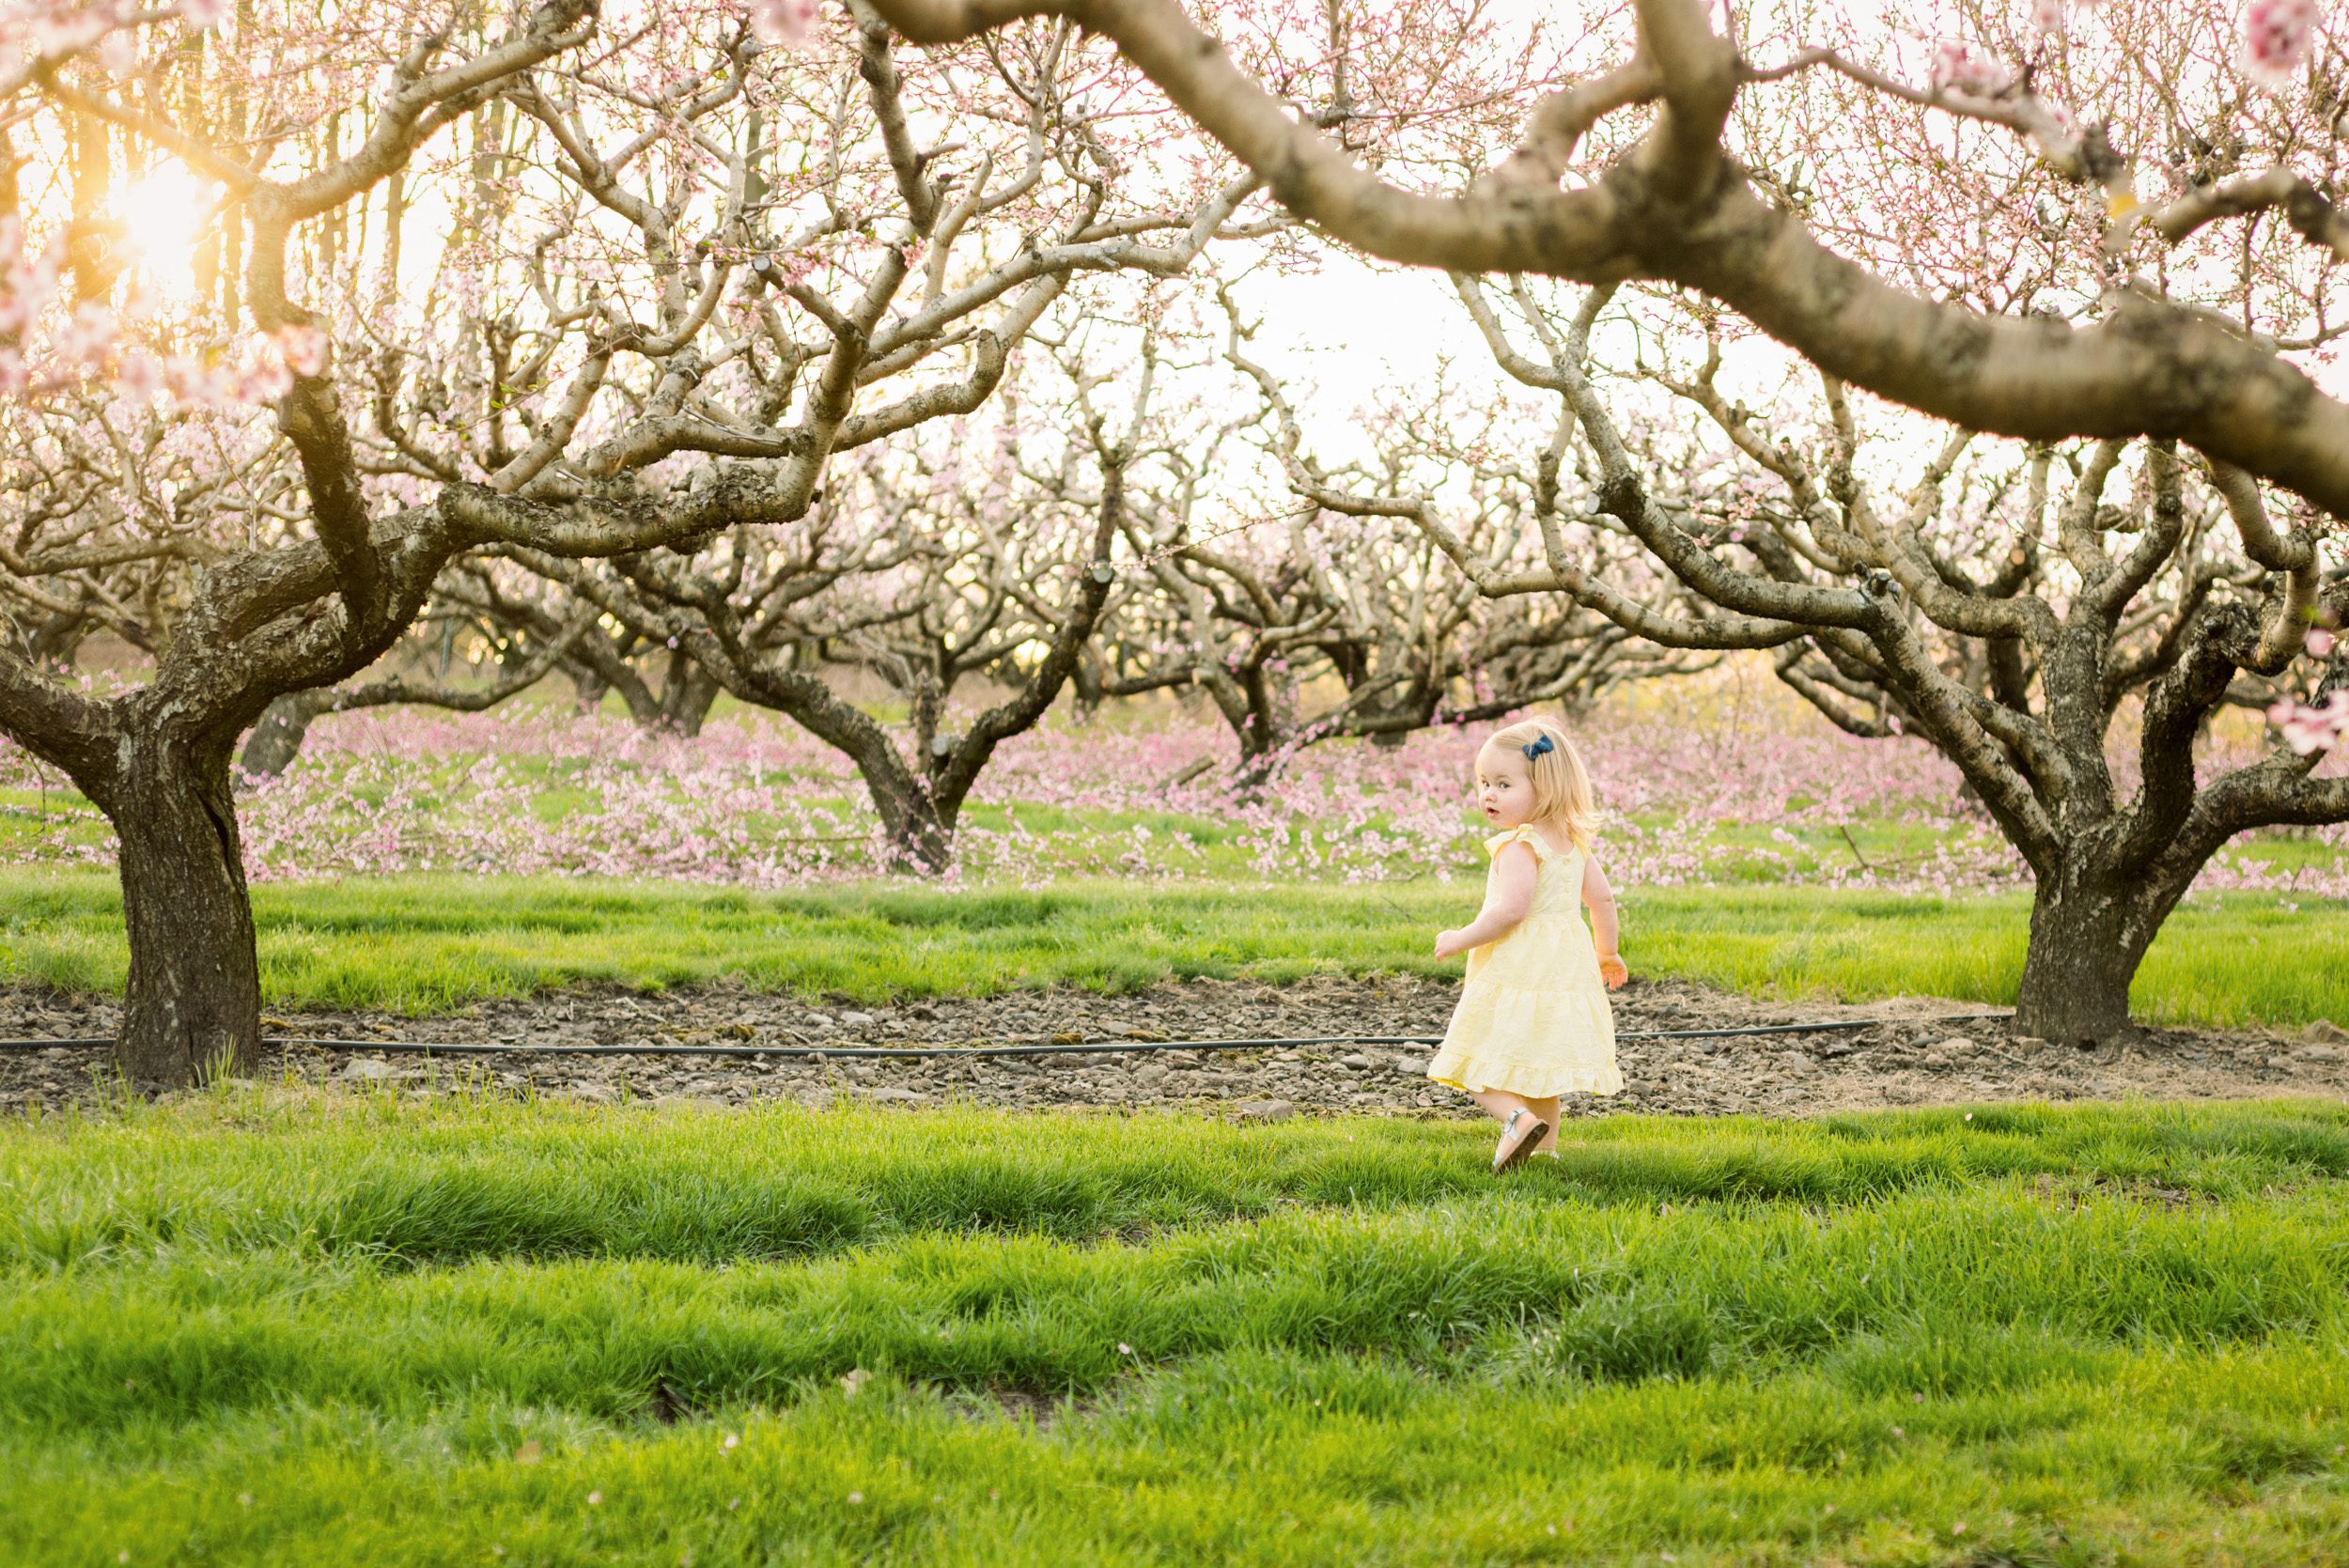 A young girl looking back over her shoulder at the camera as she runs through an orchard full of peach trees with pink flowers in bloom during a family photoshoot